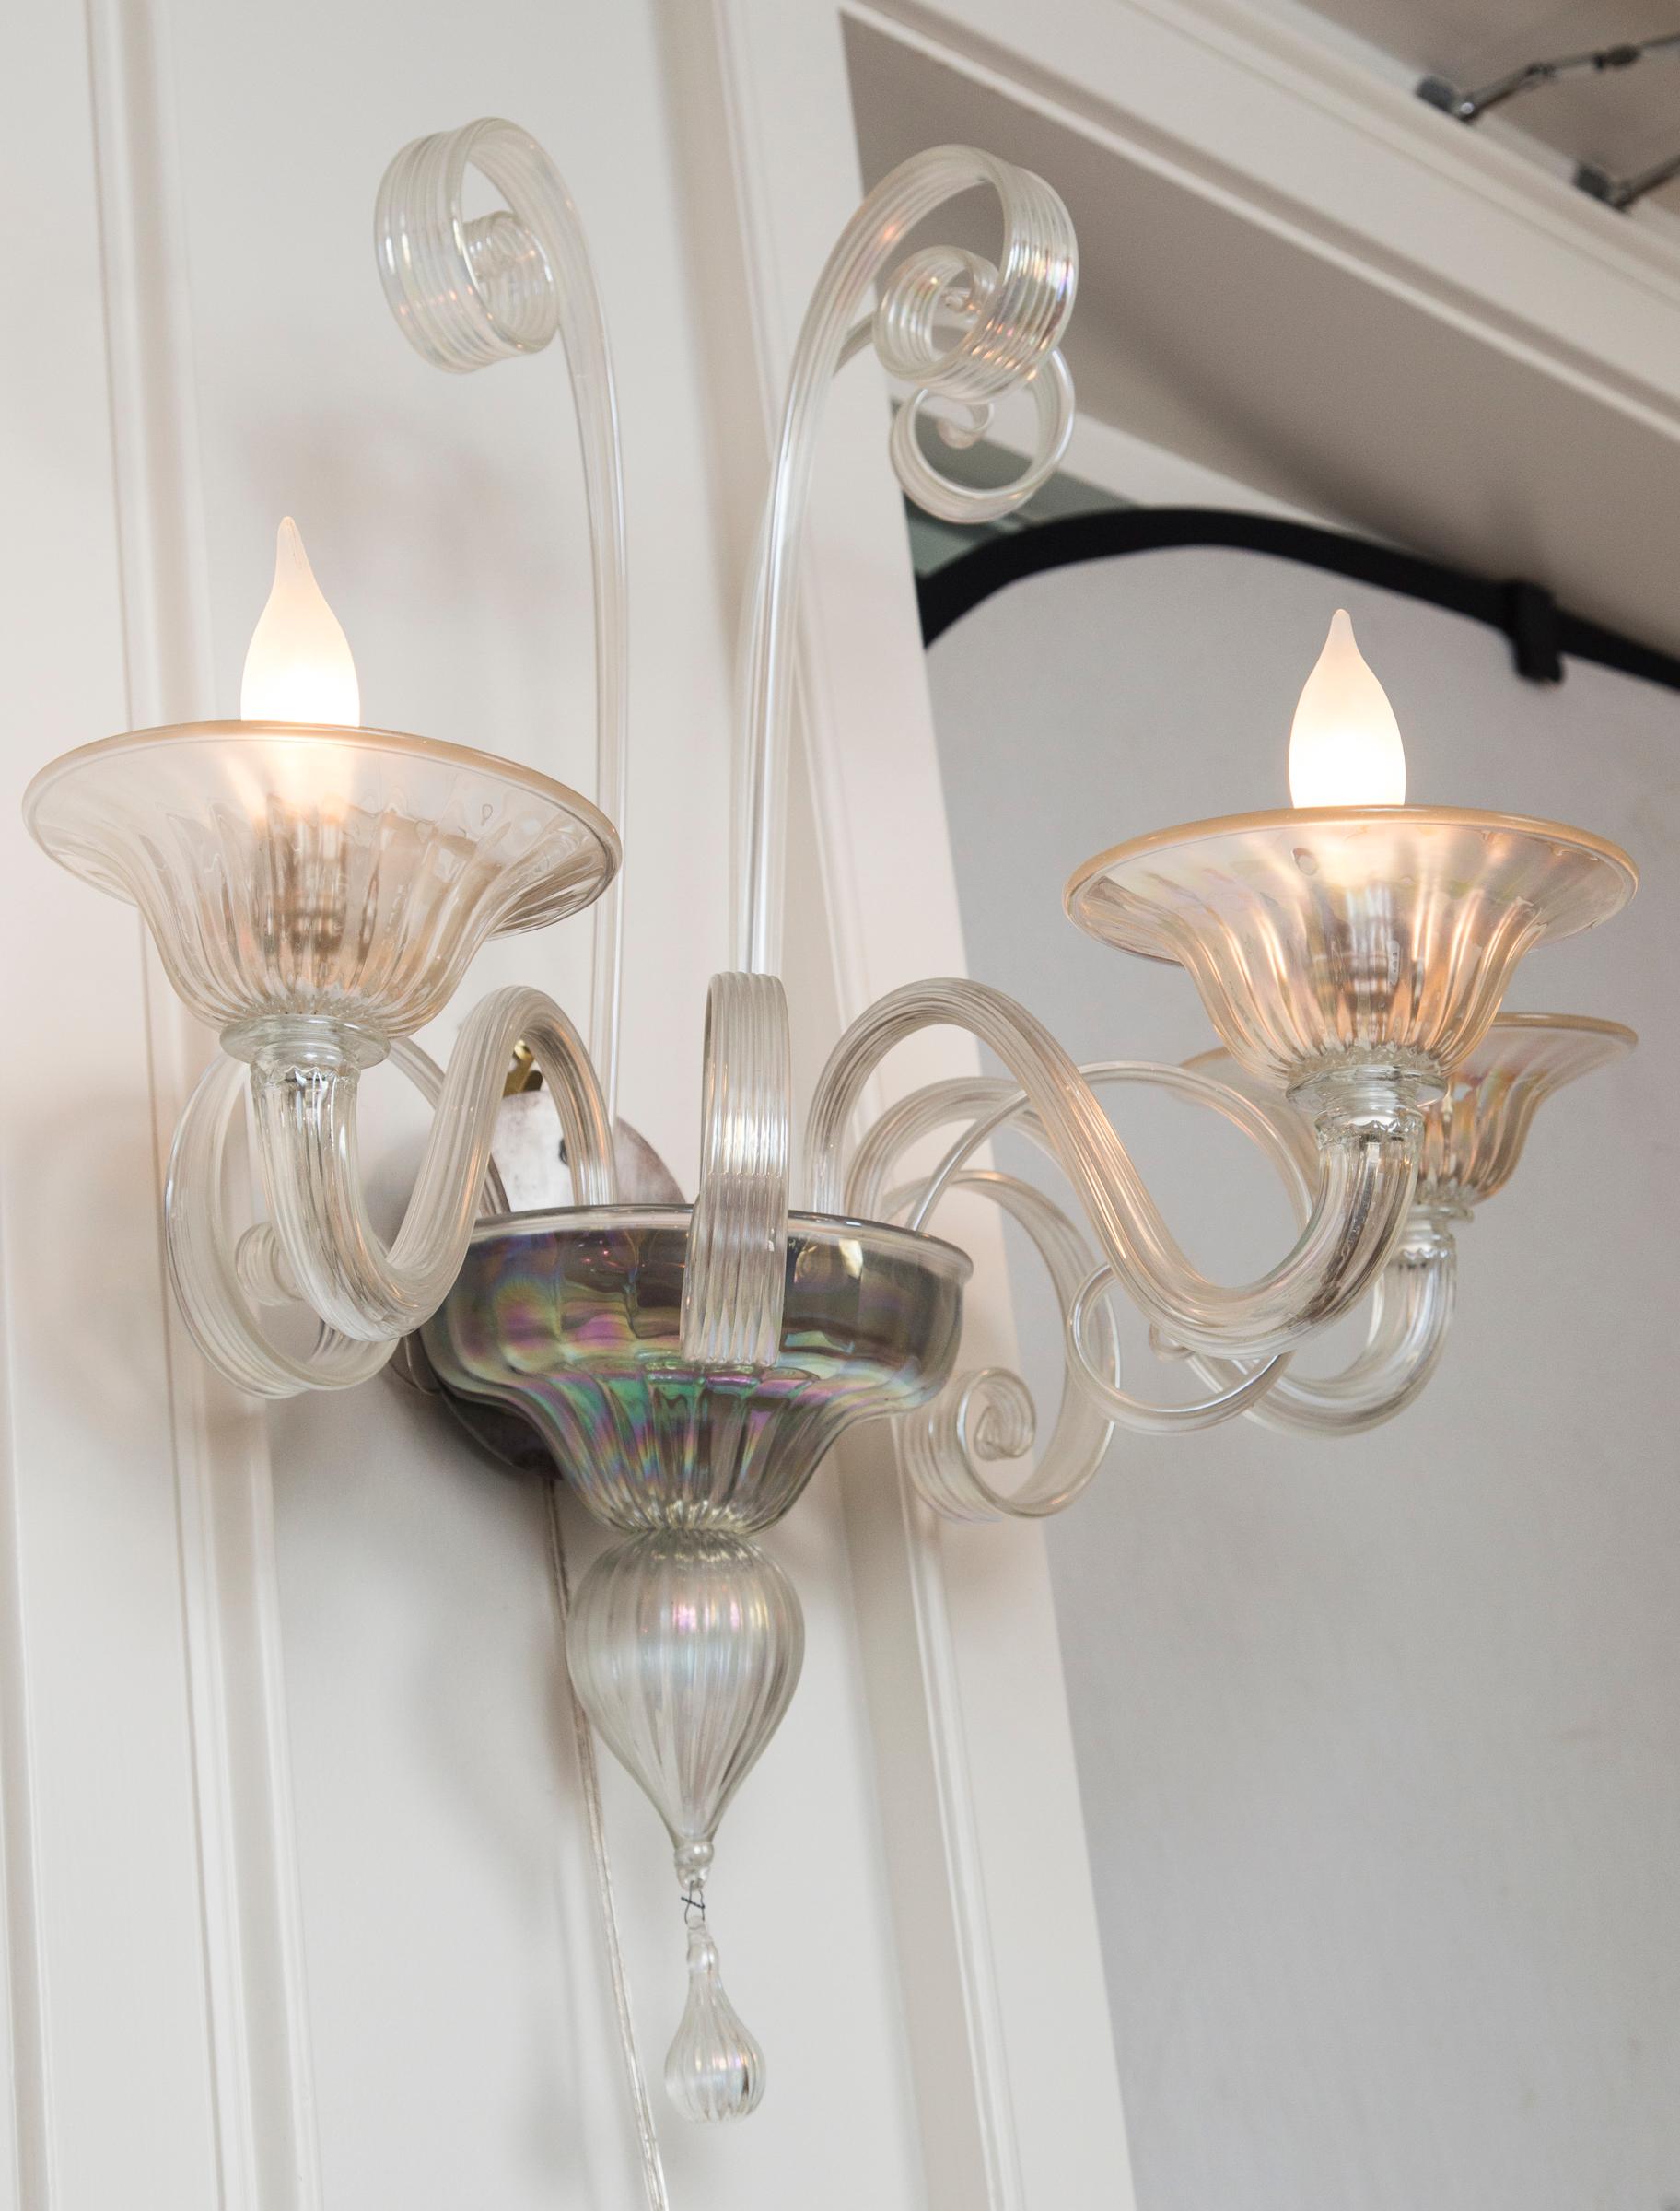 Large pair of iridescent blown three light sconces with matte nickel sockets, newly electrified to code with new UL approved matte nickel sockets, not install ready.
Minimal detailing with lovely reeded textured glass and soft swirling